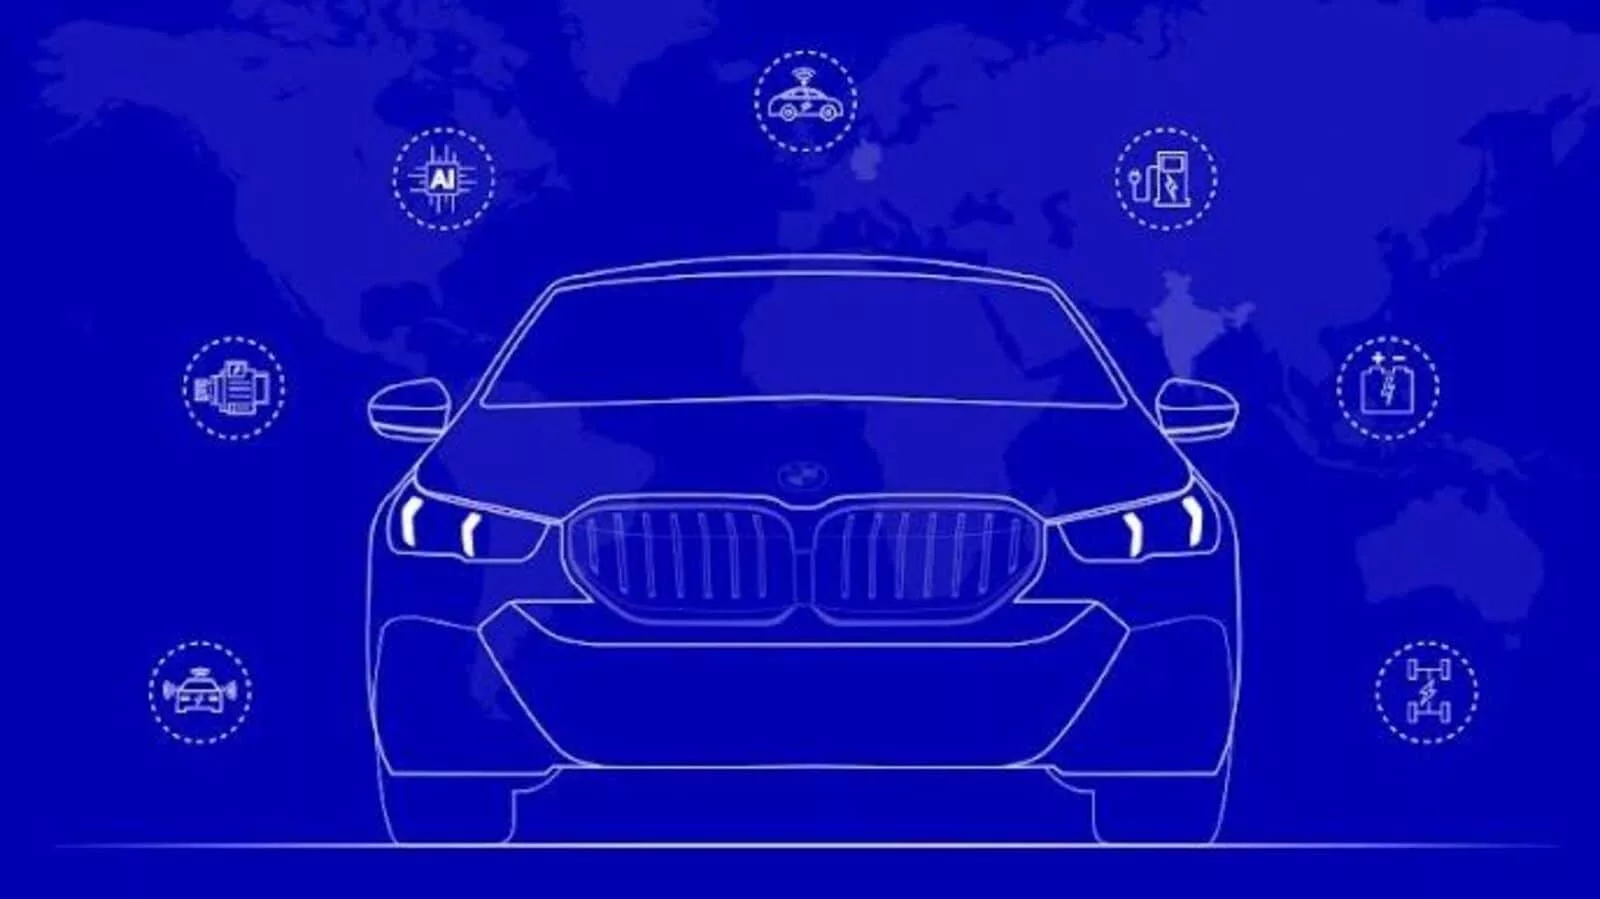 BMW, Tata Tech to jointly develop auto software